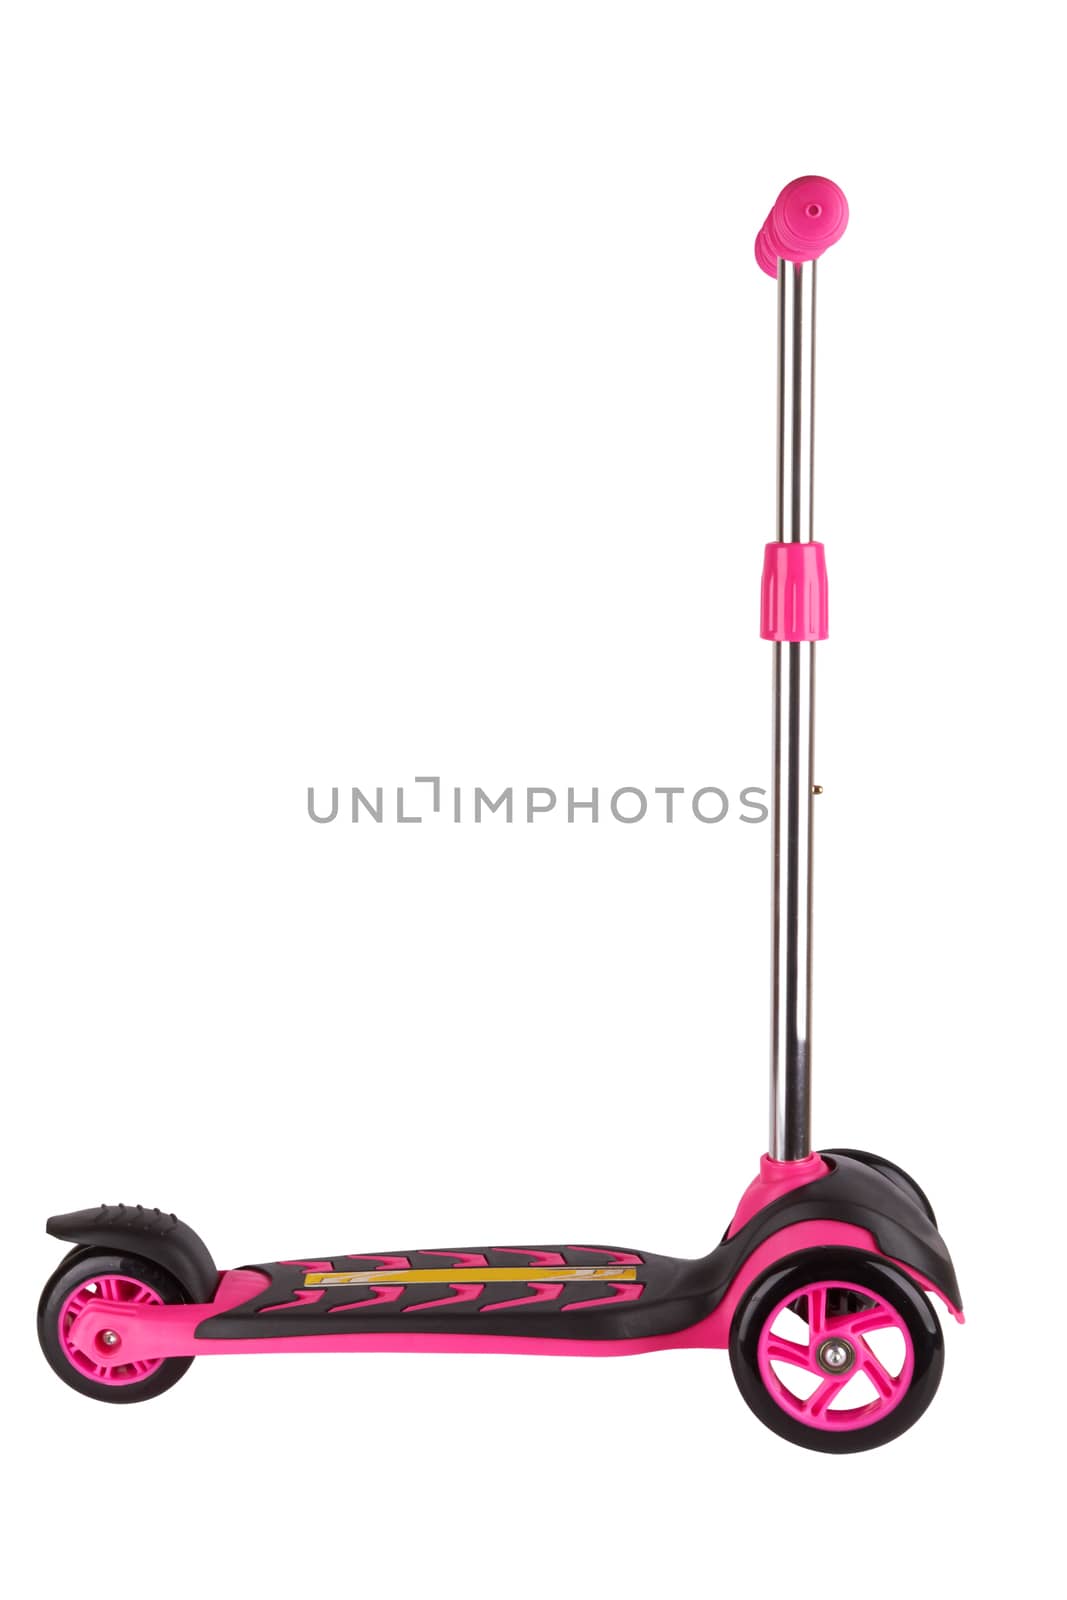 Plastic scooter isolated on a white background